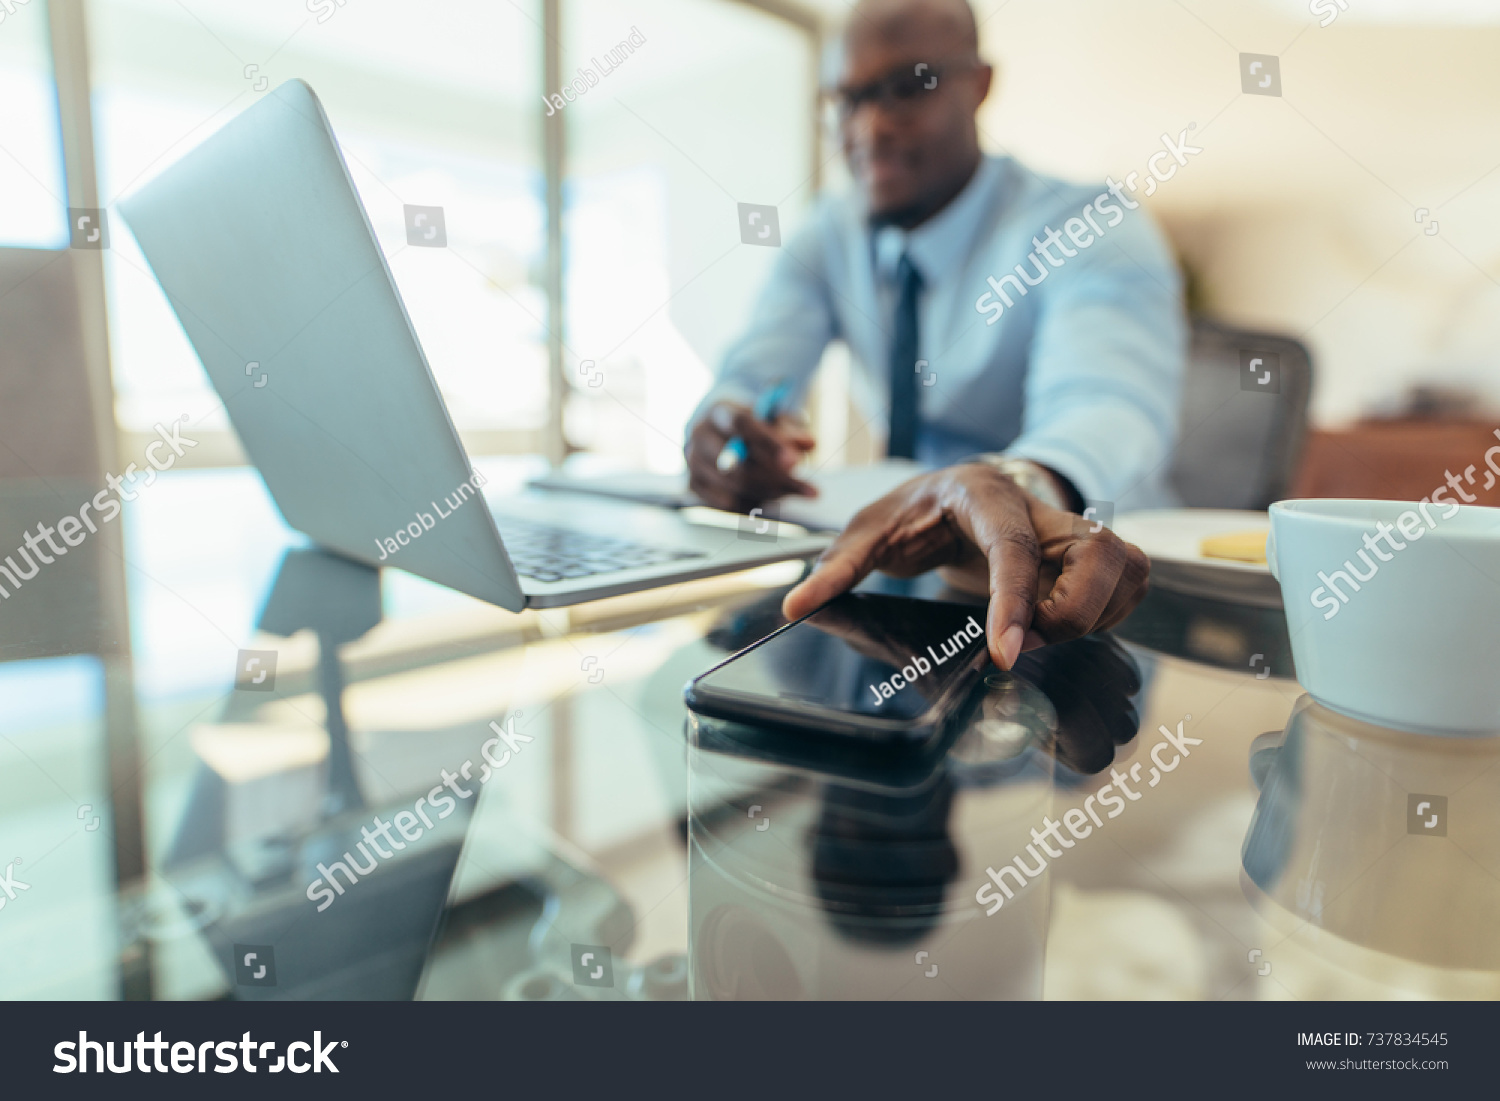 Man working on laptop computer sitting at his desk in office. Man reaching out to pick his mobile phone placed on table. #737834545